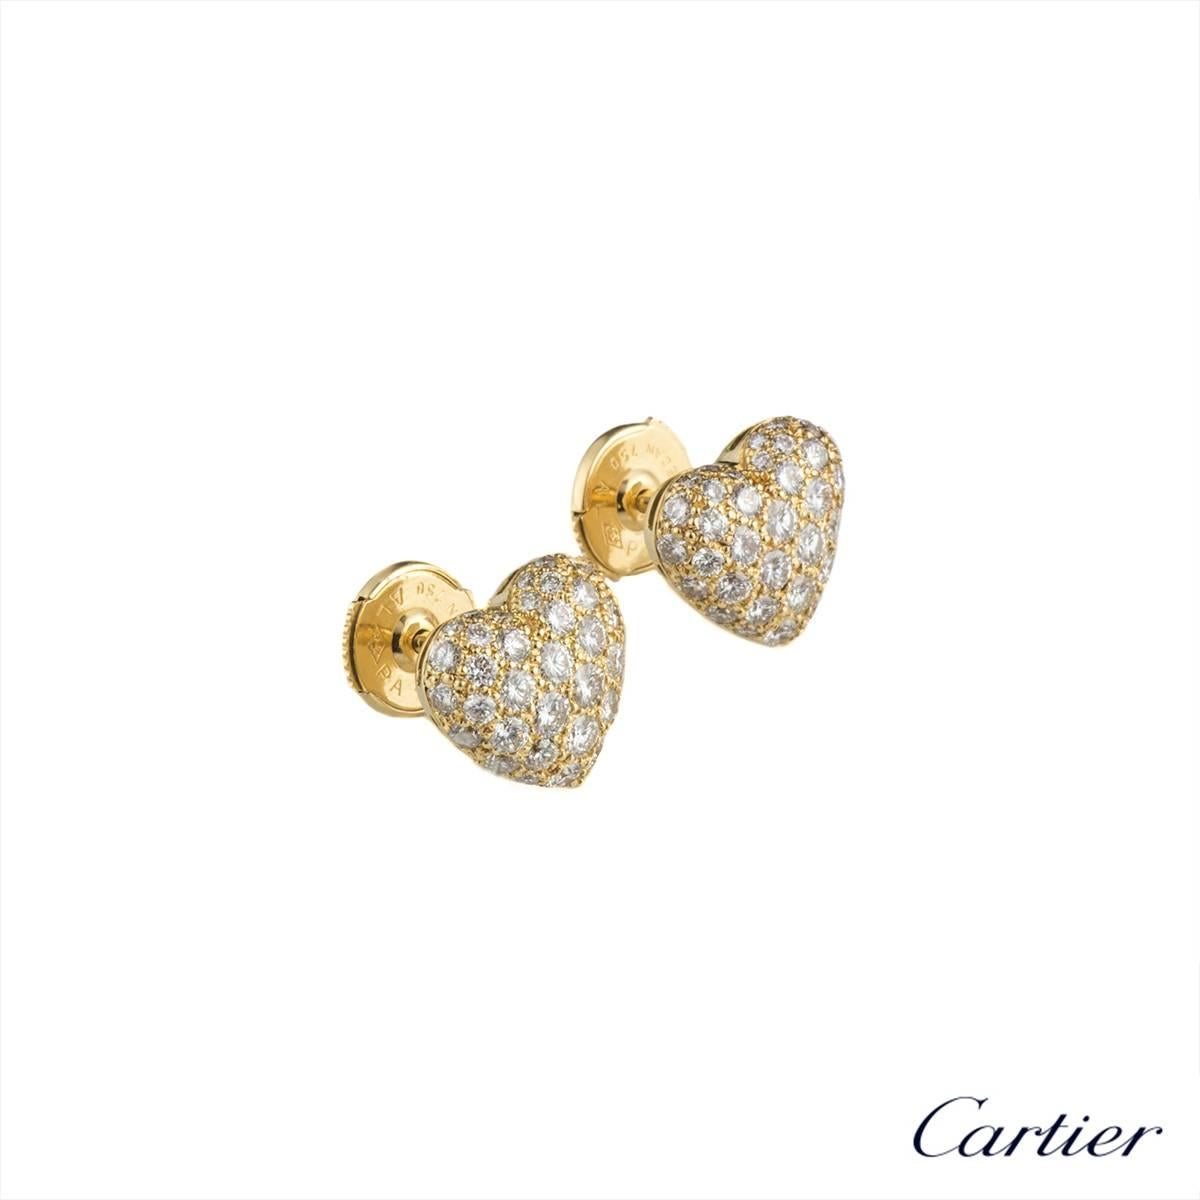 A pair of 18k yellow gold heart shape earrings. Each earring is set with 35 round brilliant cut diamonds totalling approximately 1.50ct. The earrings measure 1cmx cm and feature post and alpha back fittings, with a gross weight of 4.02 grams. 

The